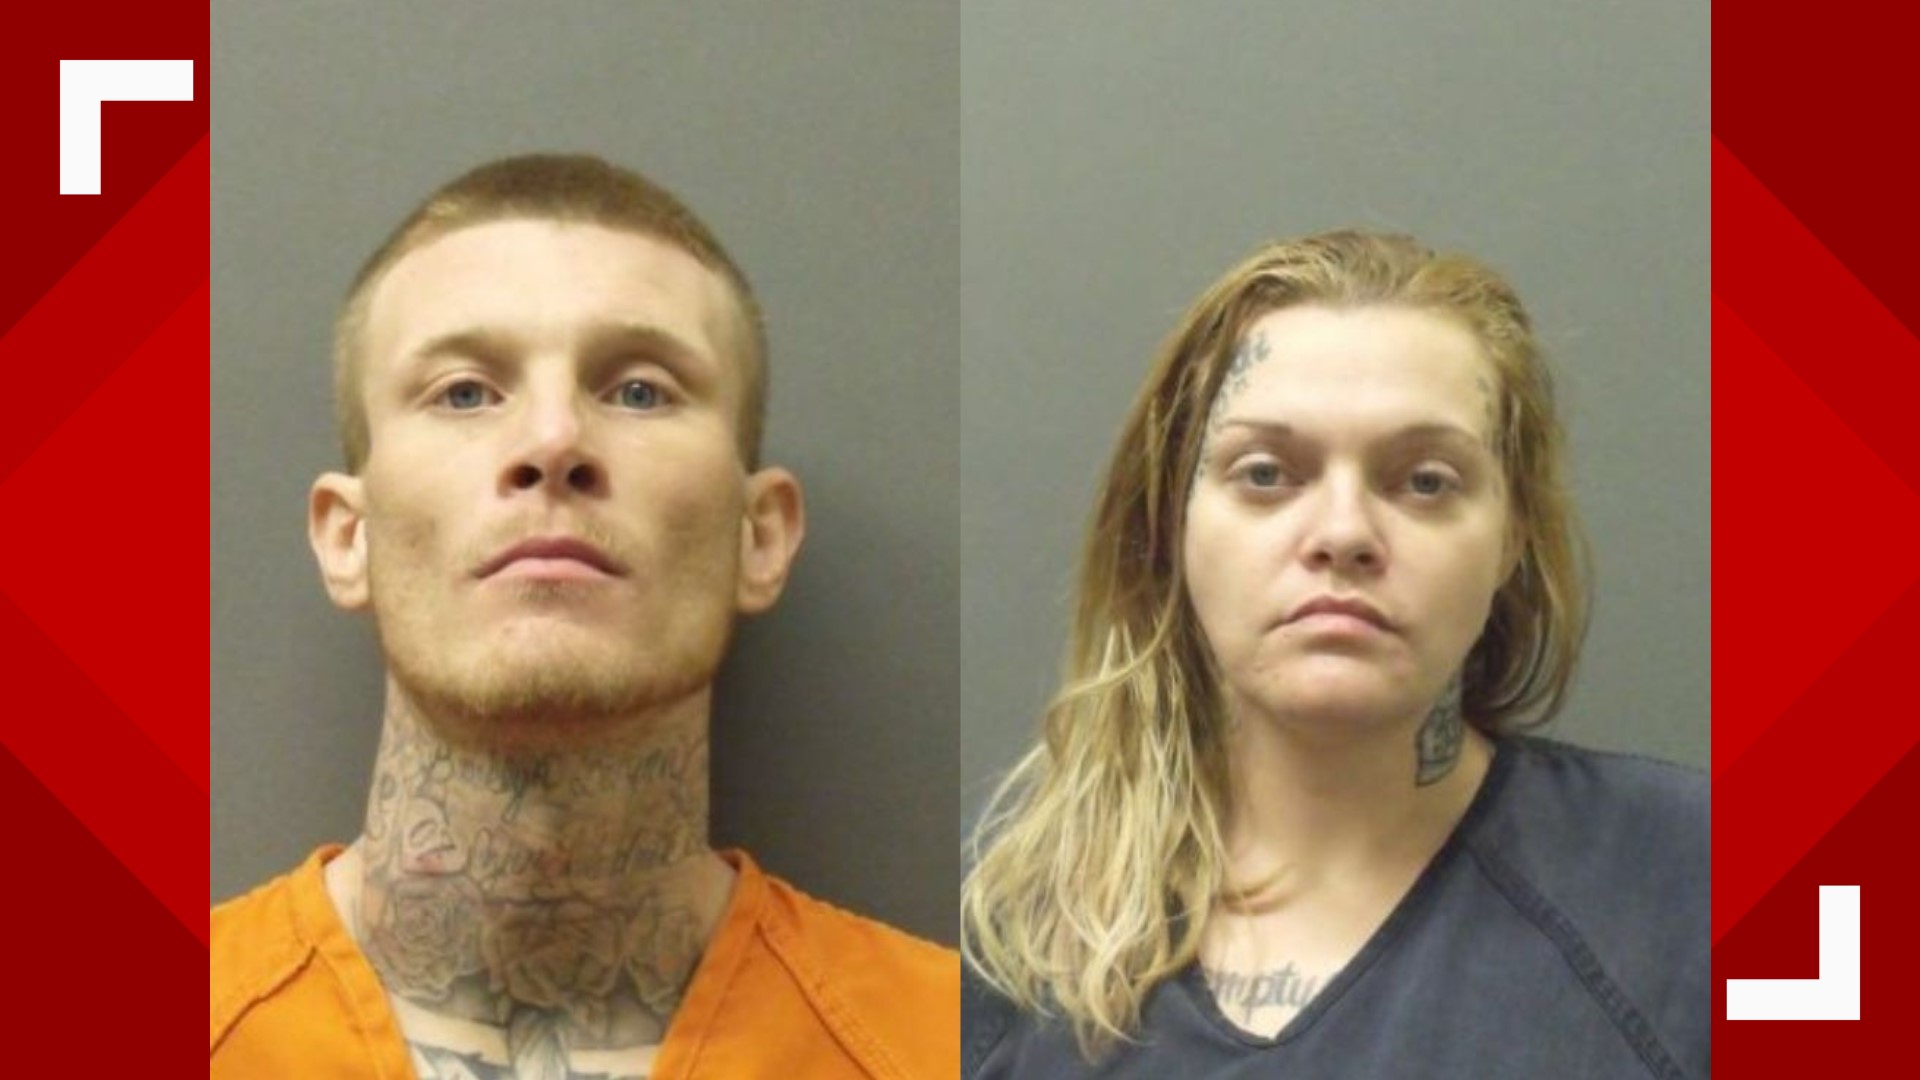 Candice Jones and Edward Barry entered guilty pleas for first degree murder.